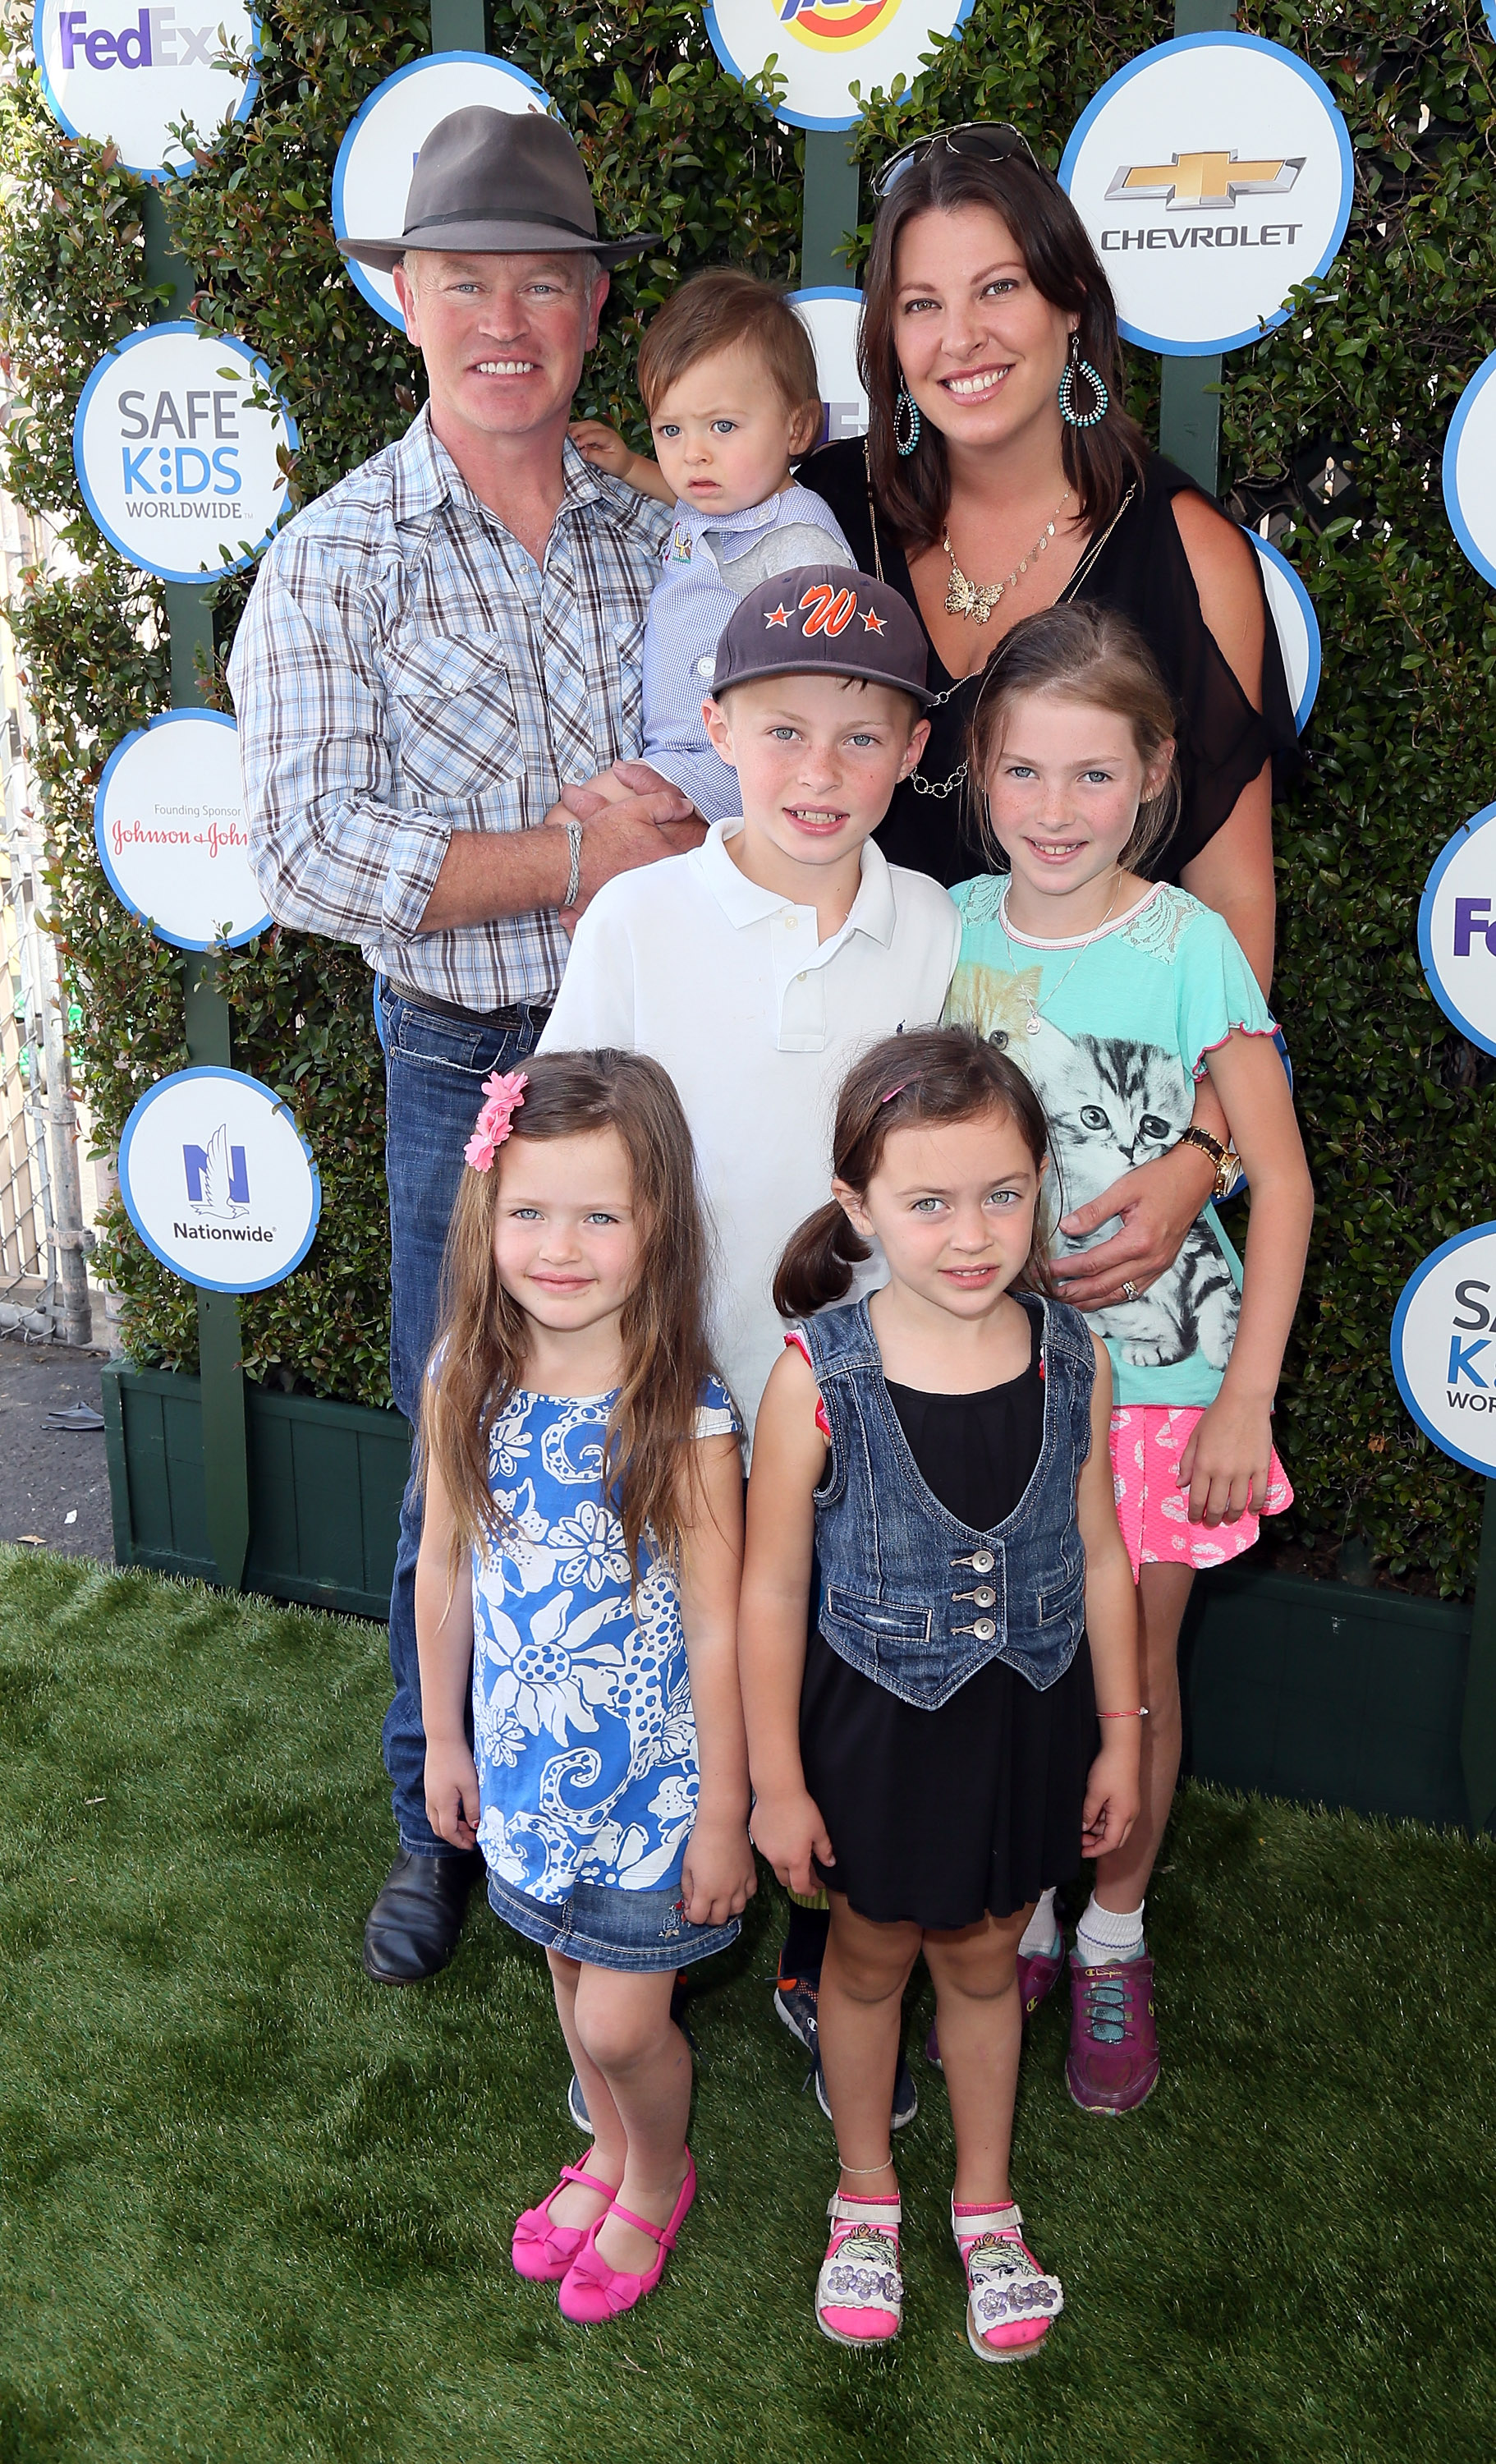 Actor Neal McDonough, his wife Ruve McDonough, and his children attend Safe Kids Day presented by Nationwide at The Lot on April 26, 2015, in West Hollywood, California. | Source: Getty Images